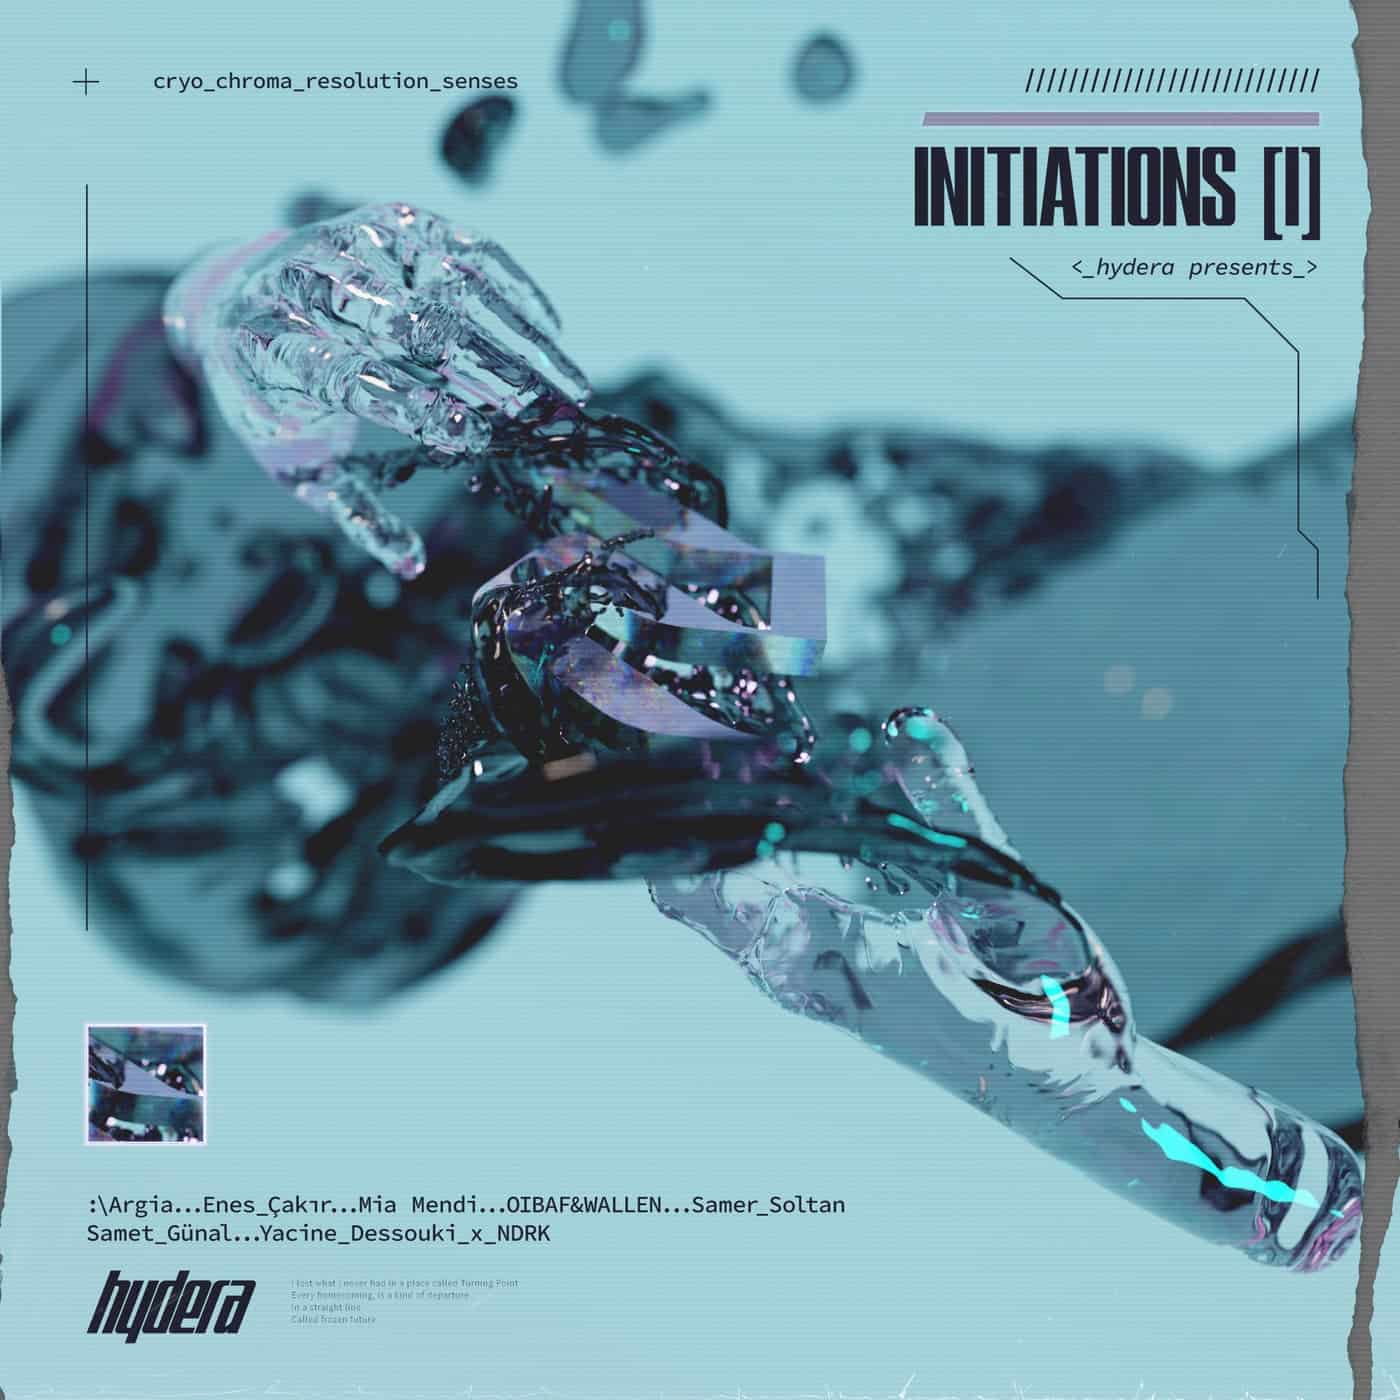 image cover: Samer Soltan - Initiations, Pt. 1 on hydera